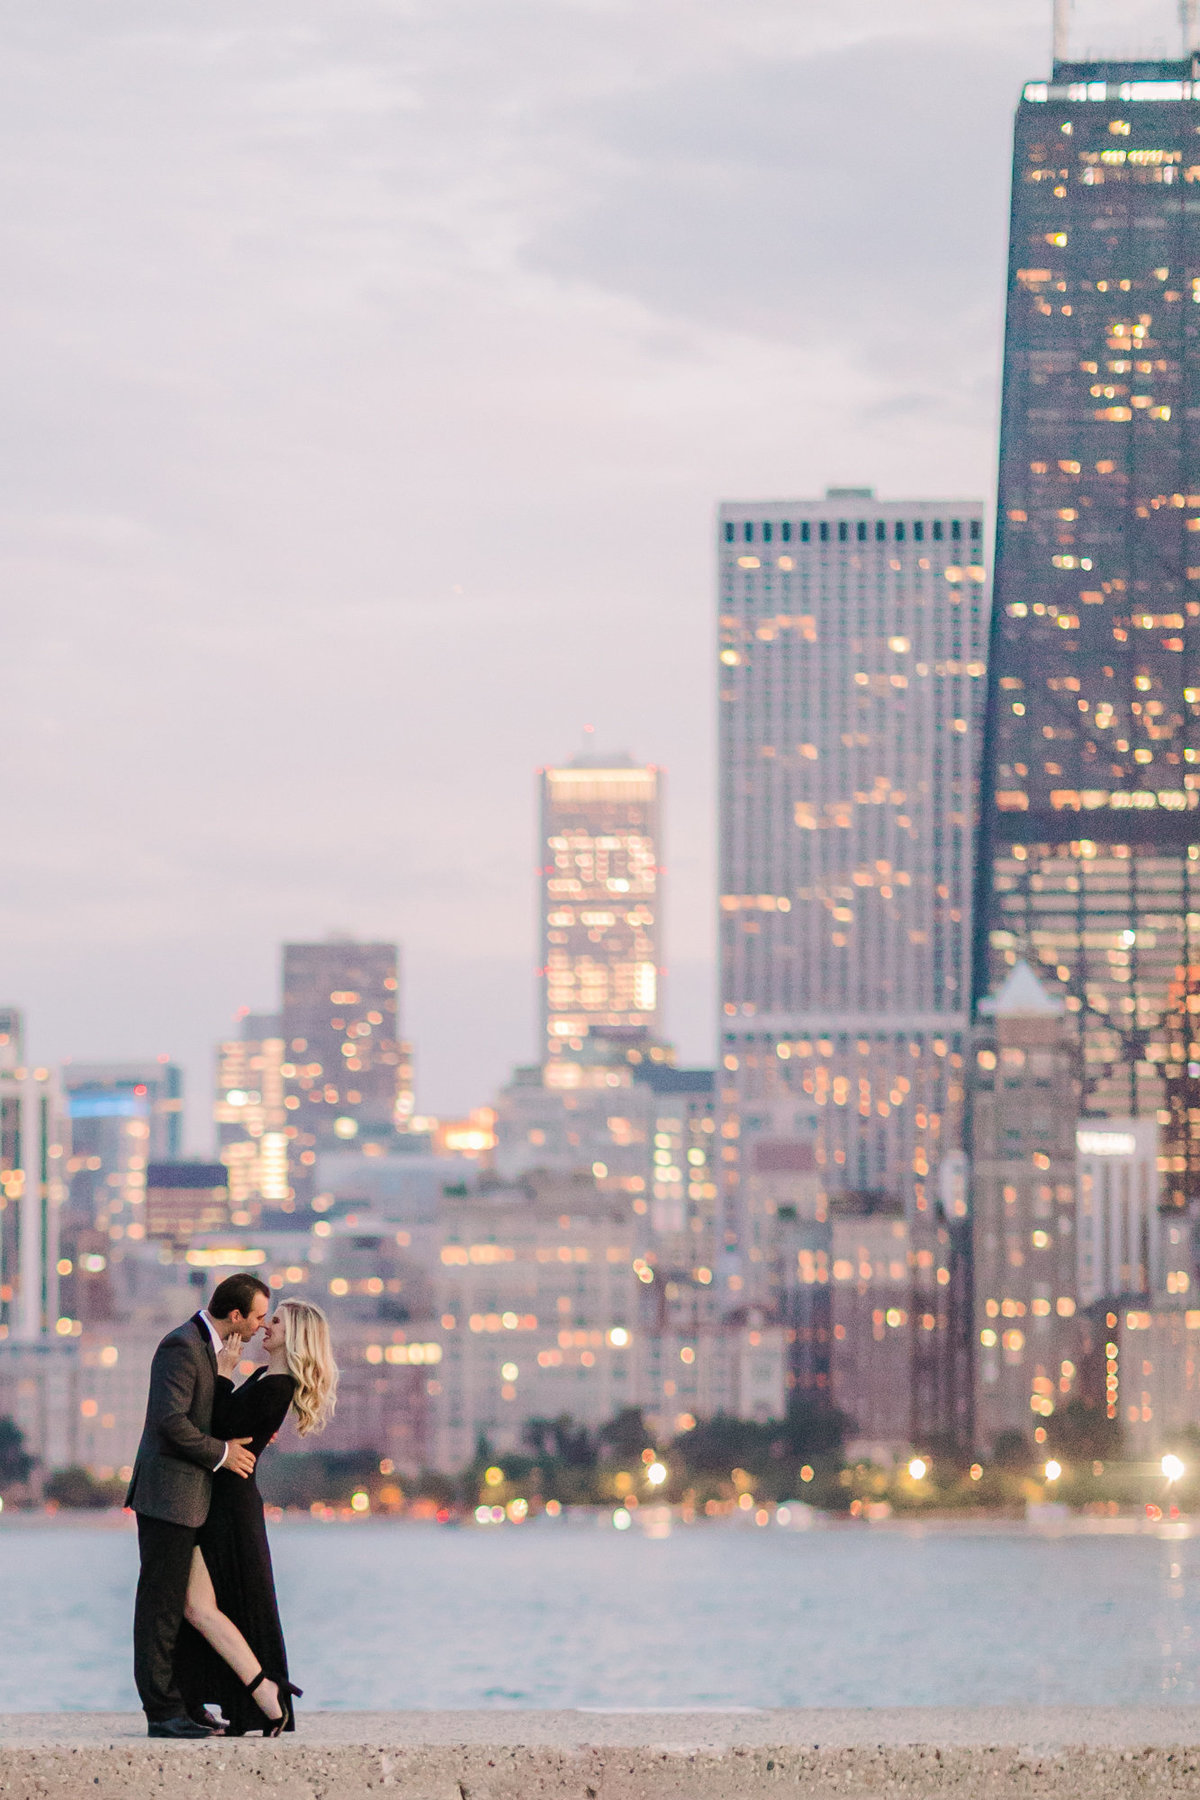 An engagement photo in front of the Chicago skyline as the lights glimmer in the background